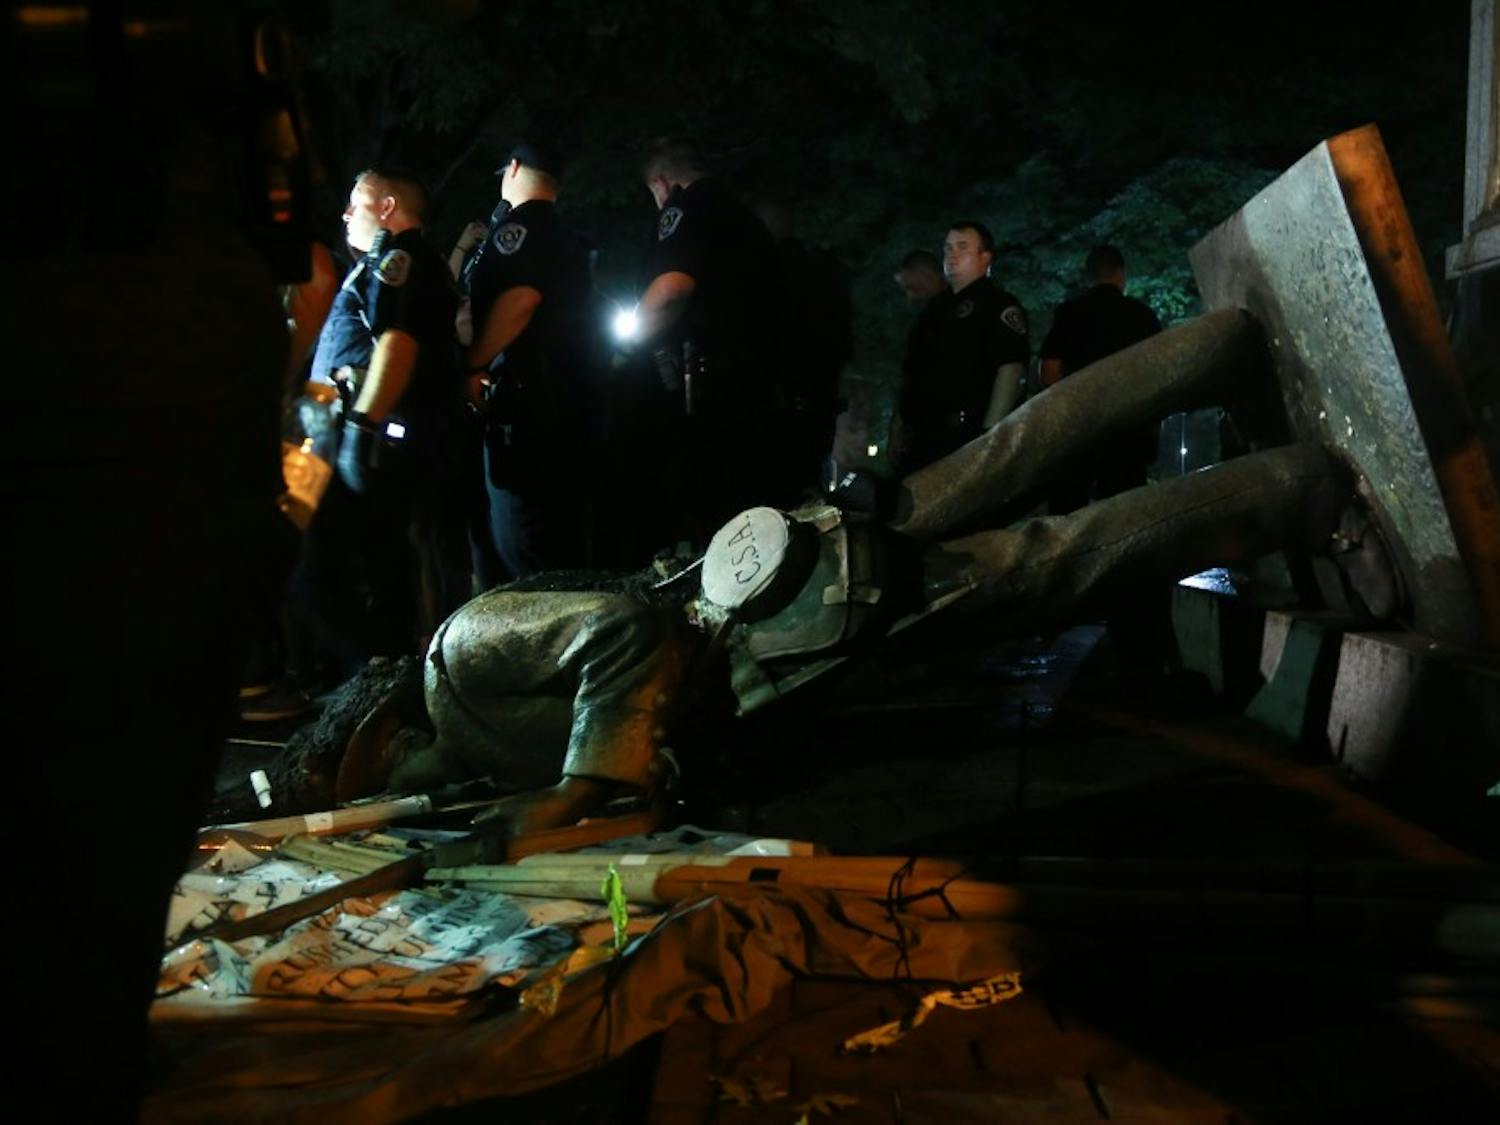 Police surround Silent Sam on Aug. 20 after the Confederate monument was pulled down by demonstrators.&nbsp;